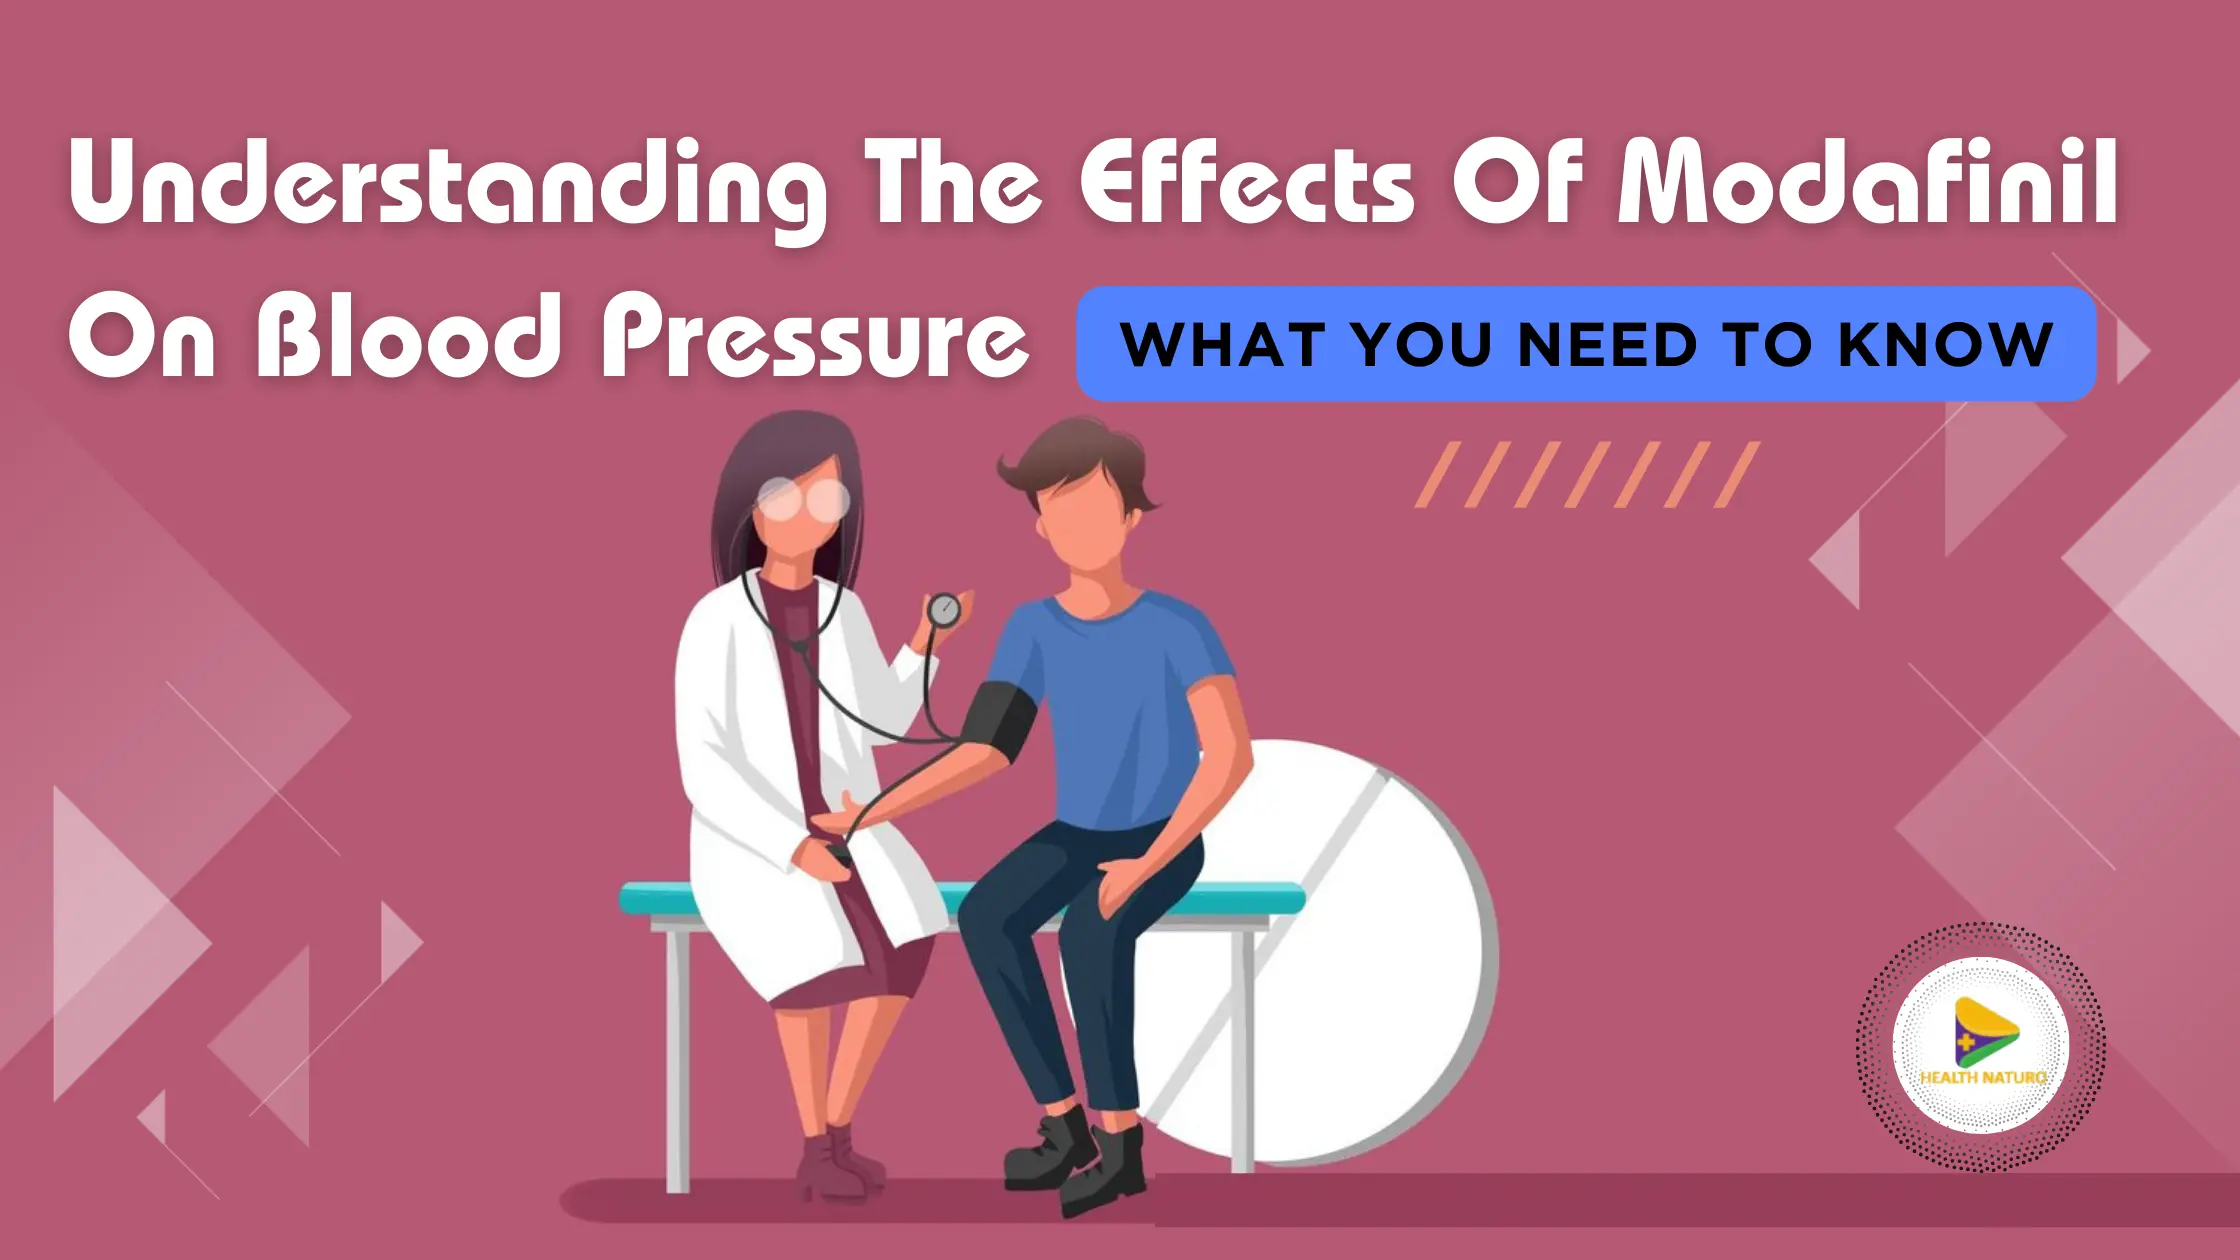 Understanding The Effects Of Modafinil On Blood Pressure